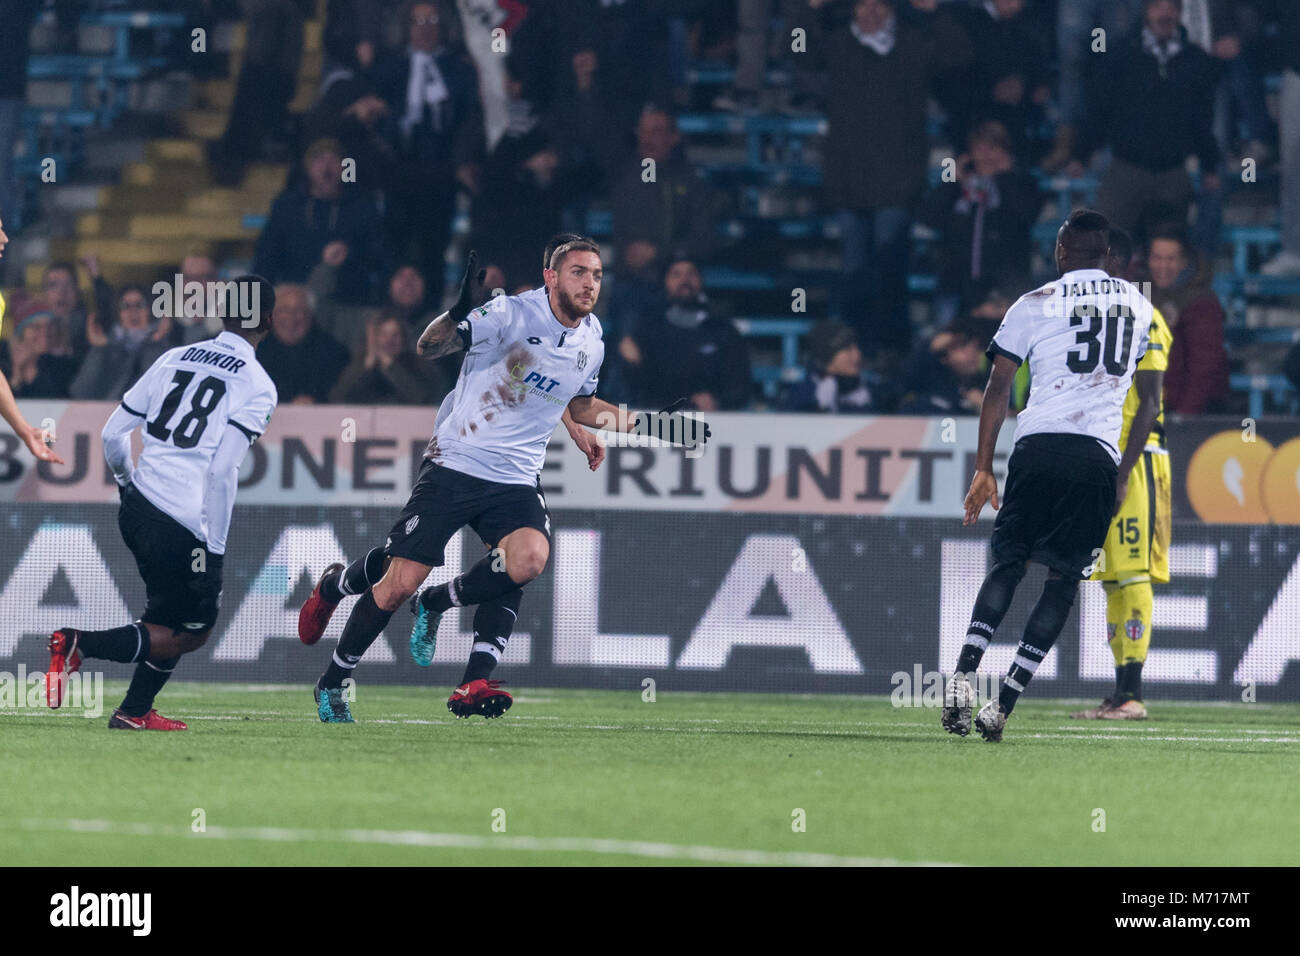 Giovanni Di Noia of Cesena celebrates after scoring his team's first ...